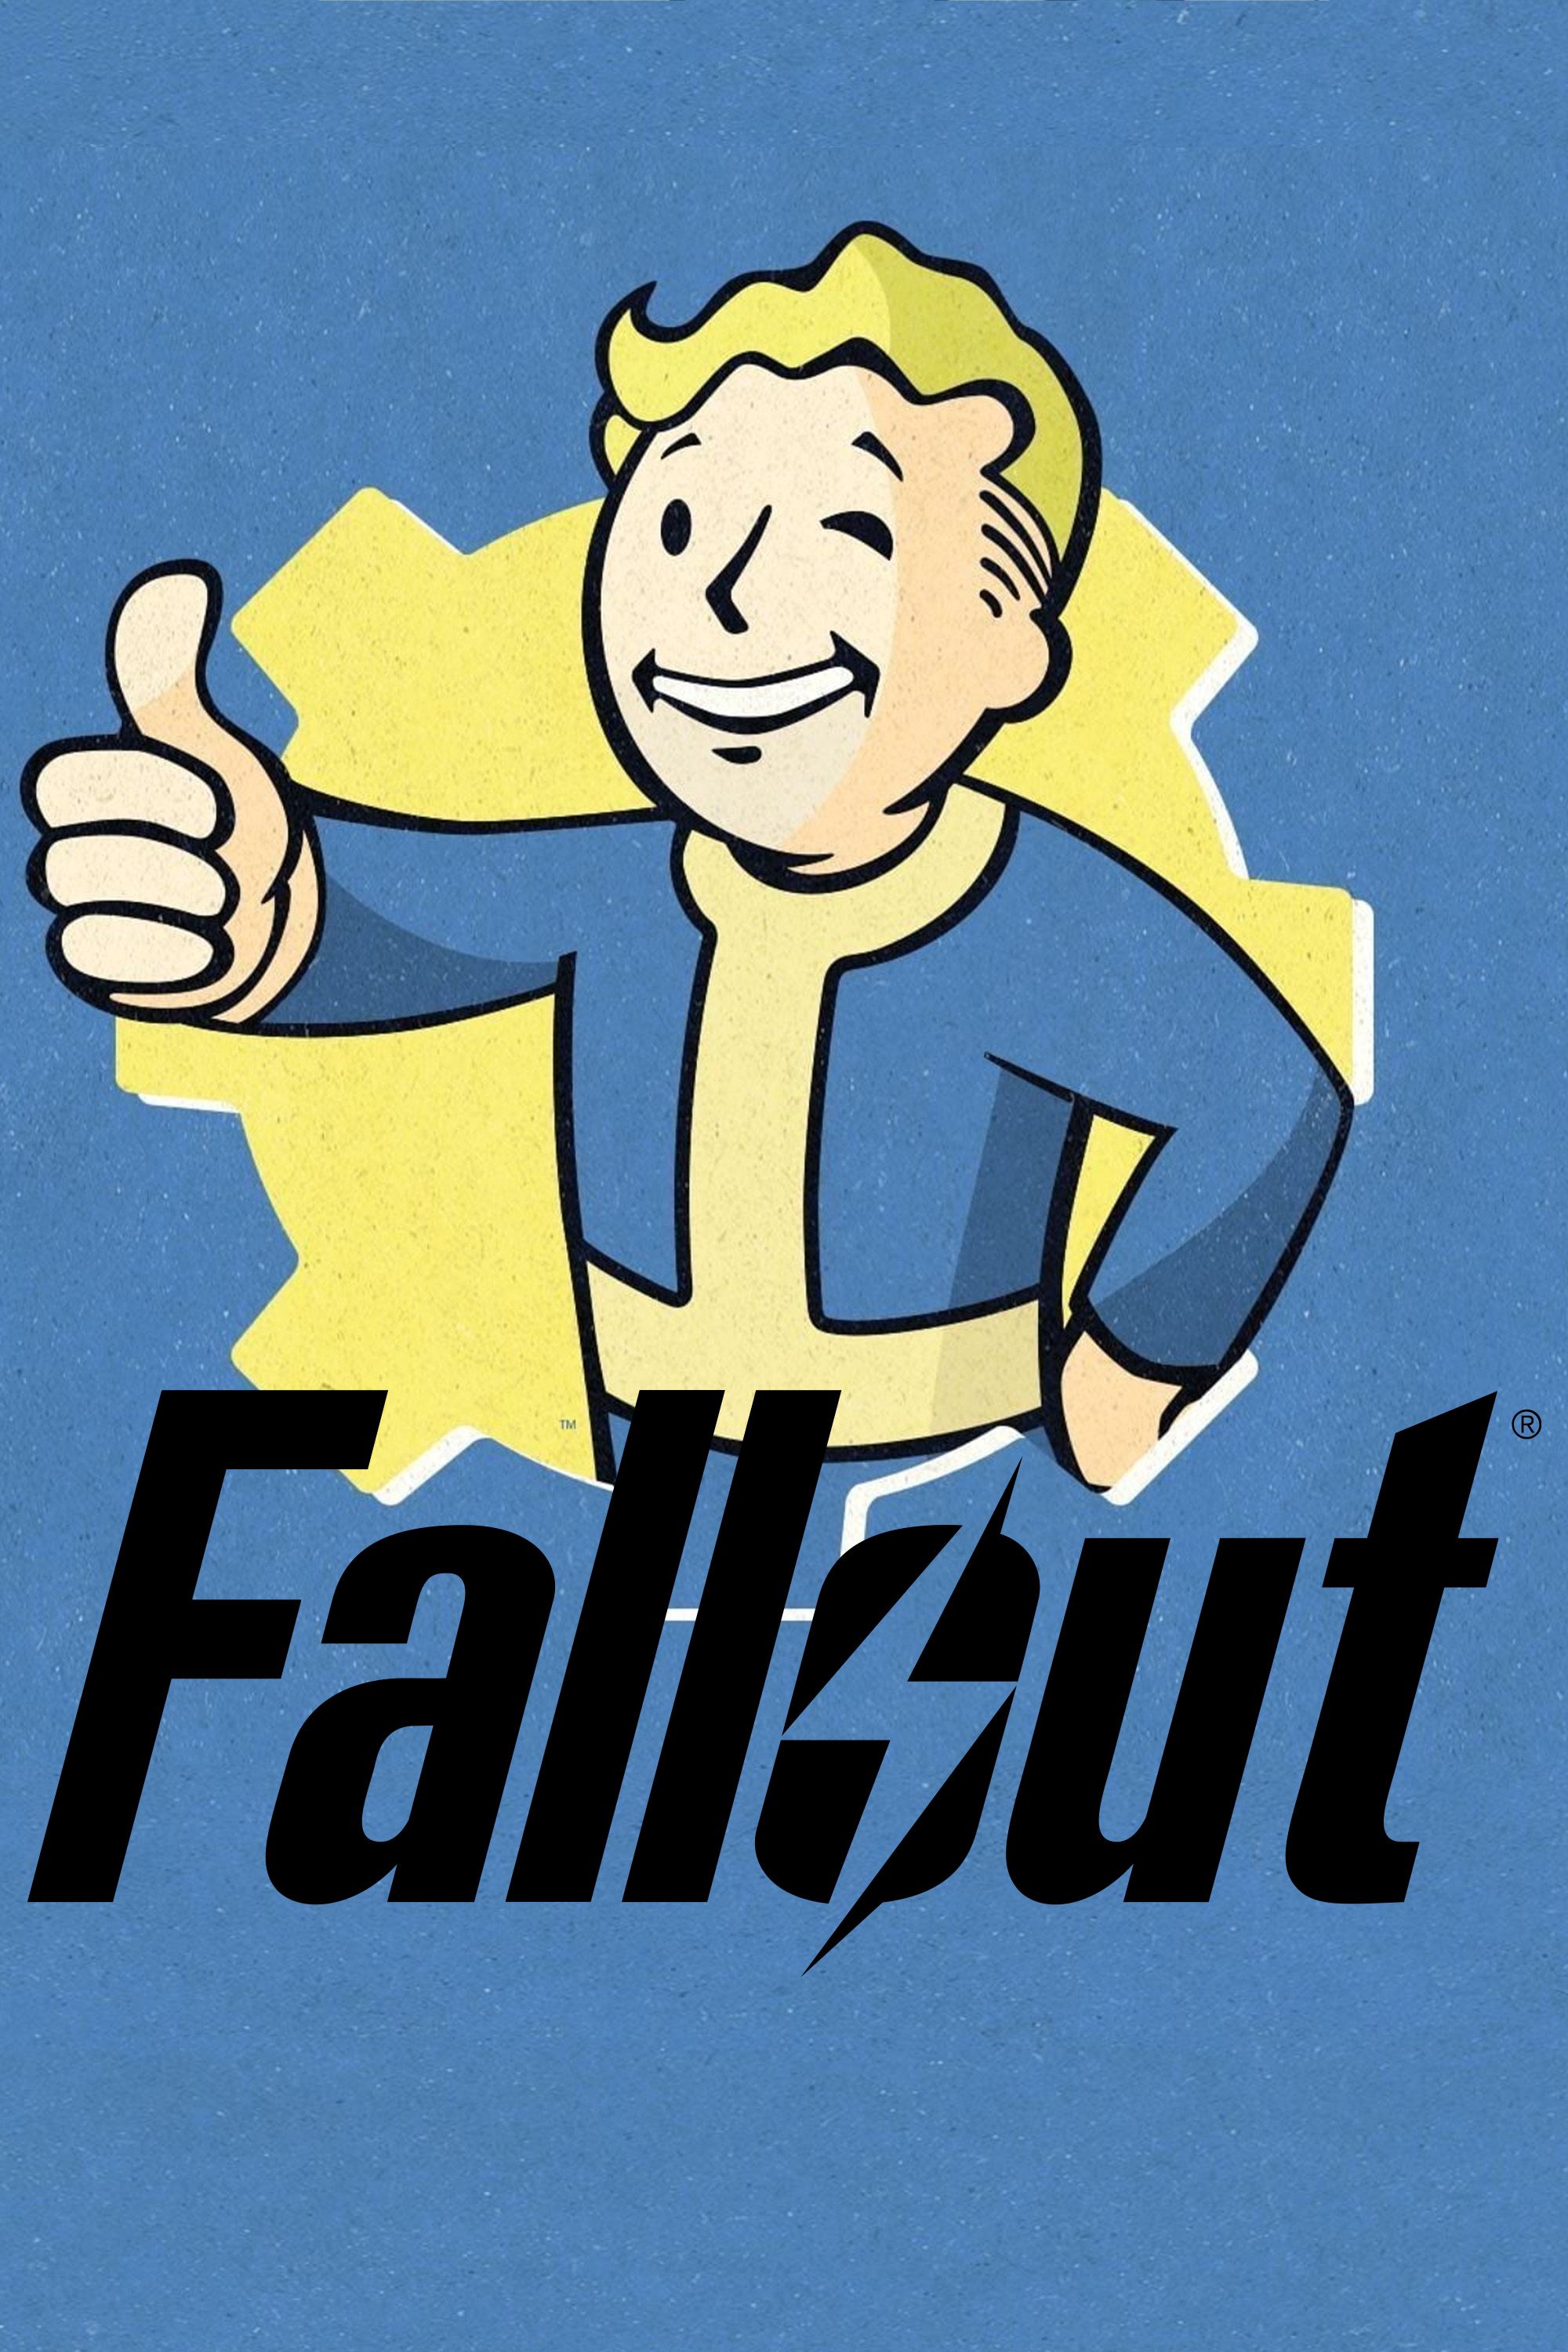 Fallout TV Series Reveals First Look at Characters, Brotherhood of